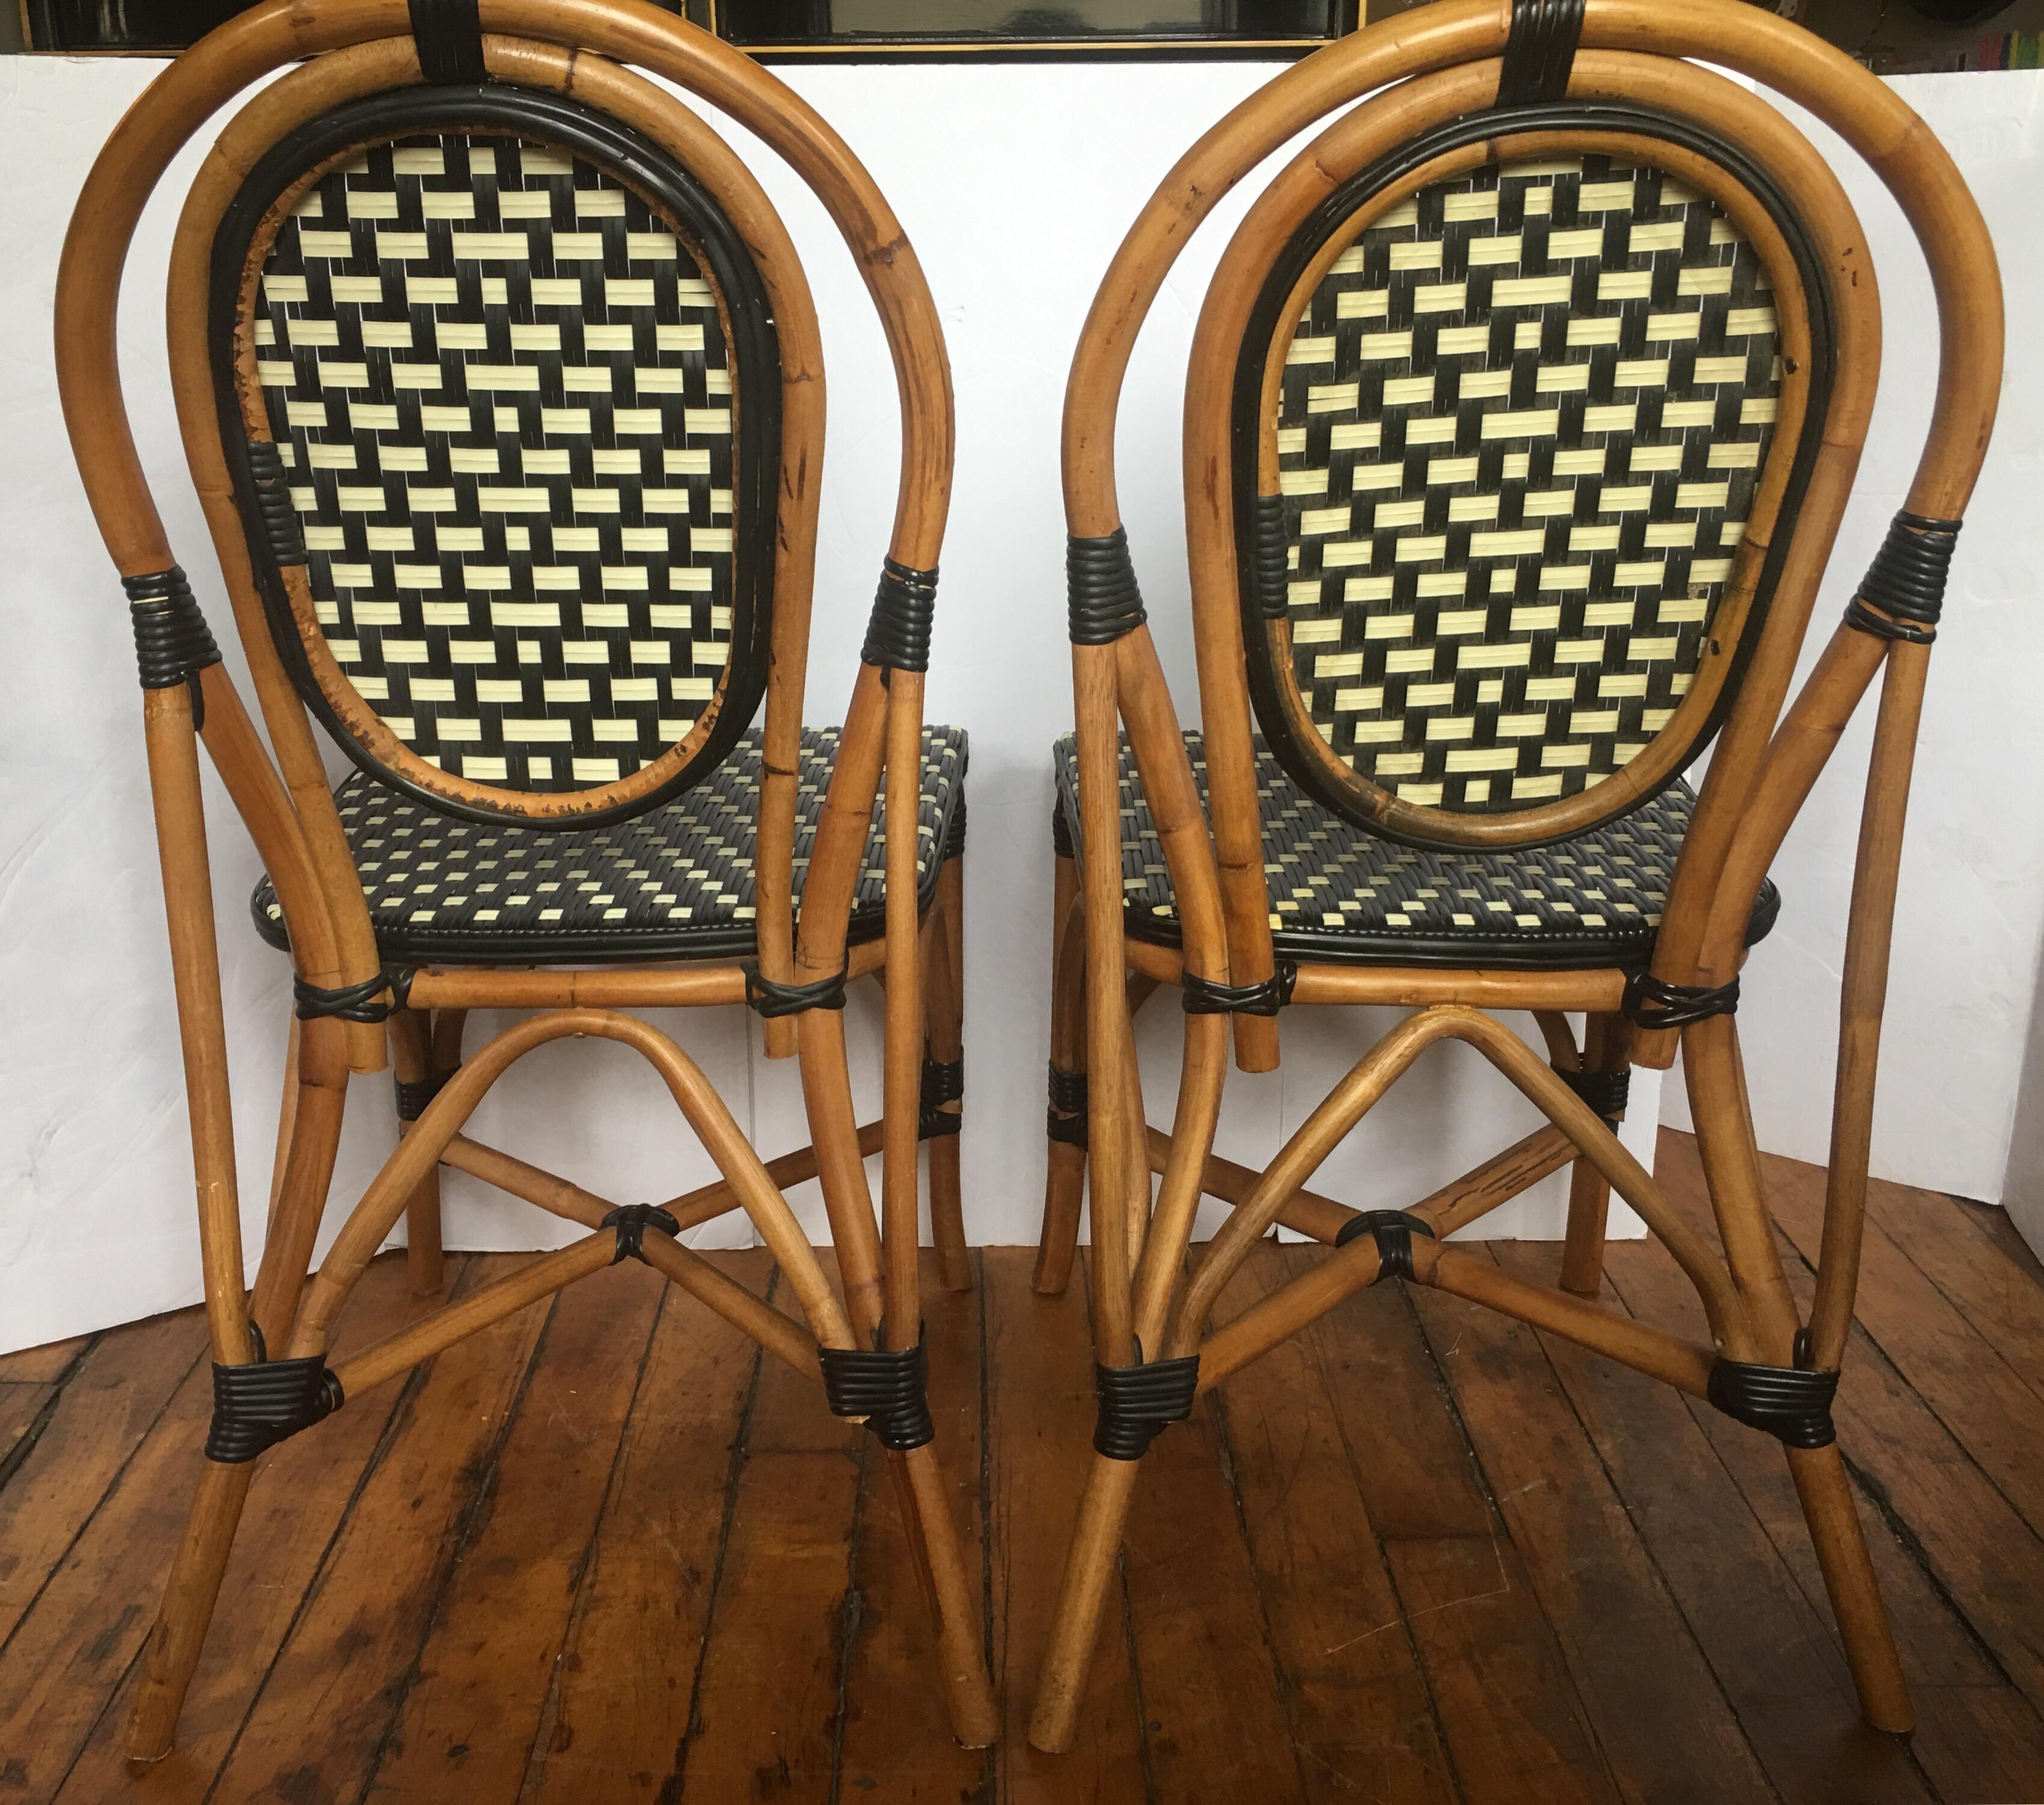 Pair of Classic French style bistro dining side chairs just like those you find in a Paris café. Frames expertly handcrafted of natural Malacca/Manau steamed bent cane with neutral black/ivory woven nylon seats and backs. For indoor and outdoor use